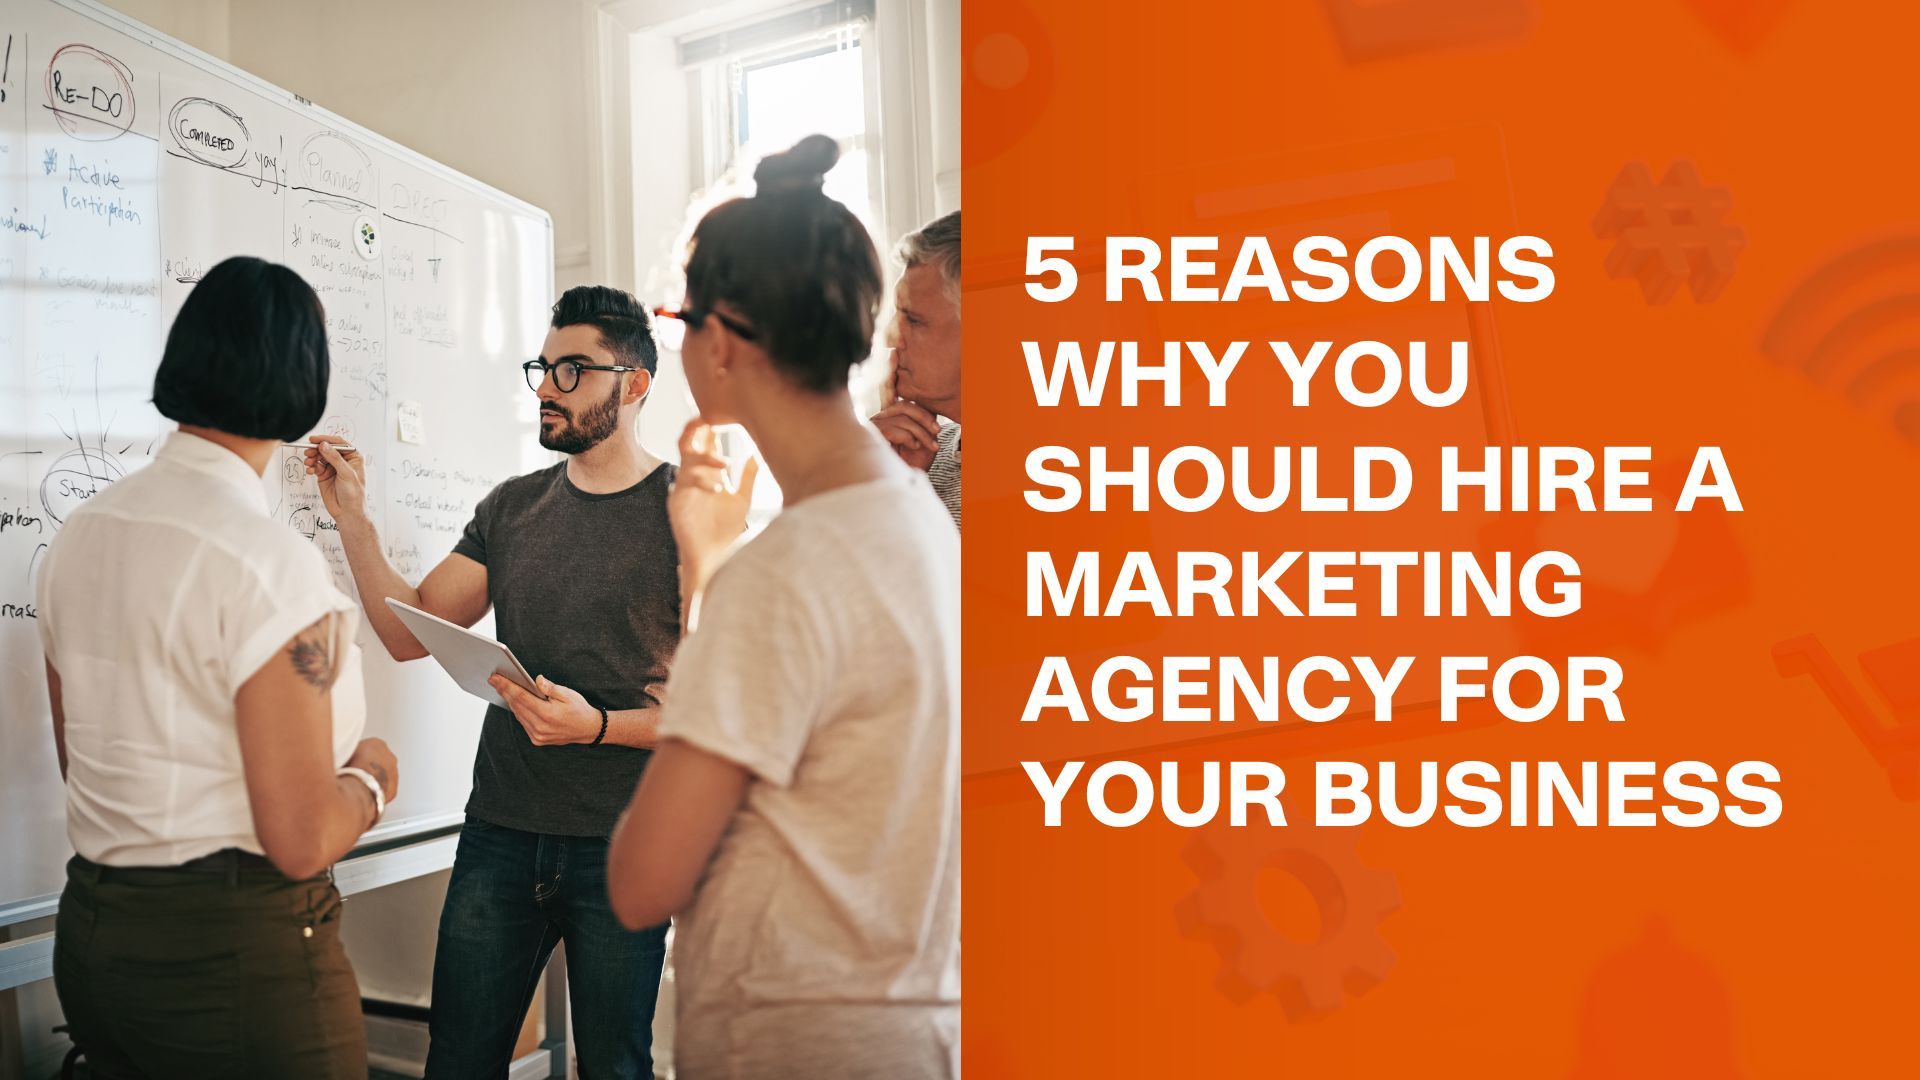 5 Reasons Why You Should Hire a Marketing Agency for Your Business